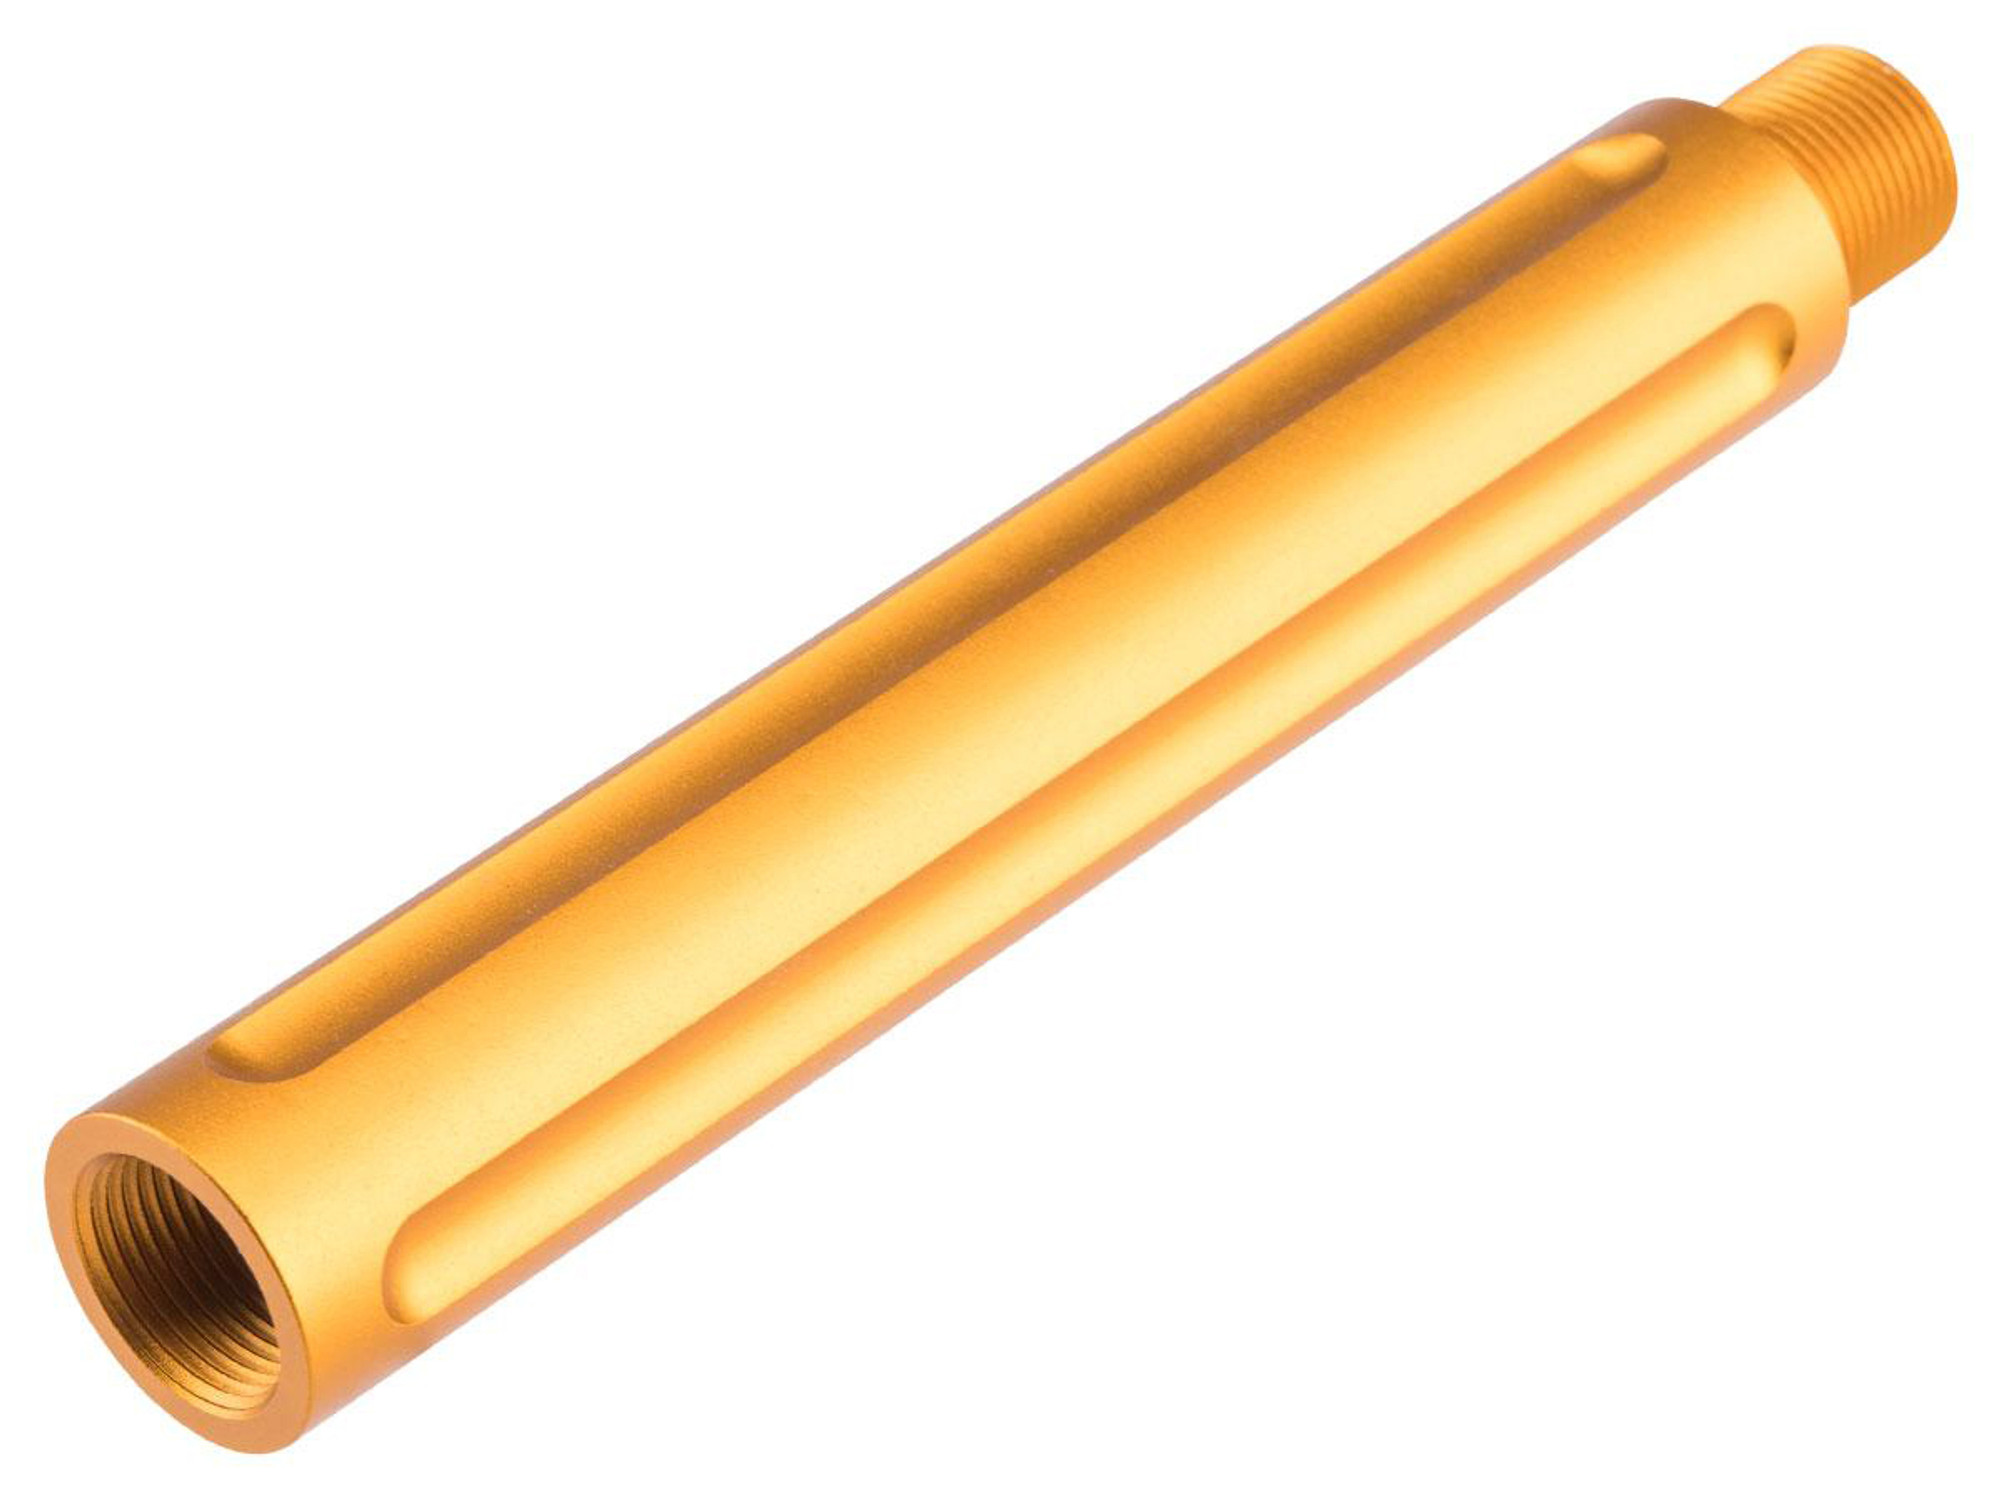 Slong Airsoft 14mm Negative Outer Barrel Extension (Size: 117mm / Gold)